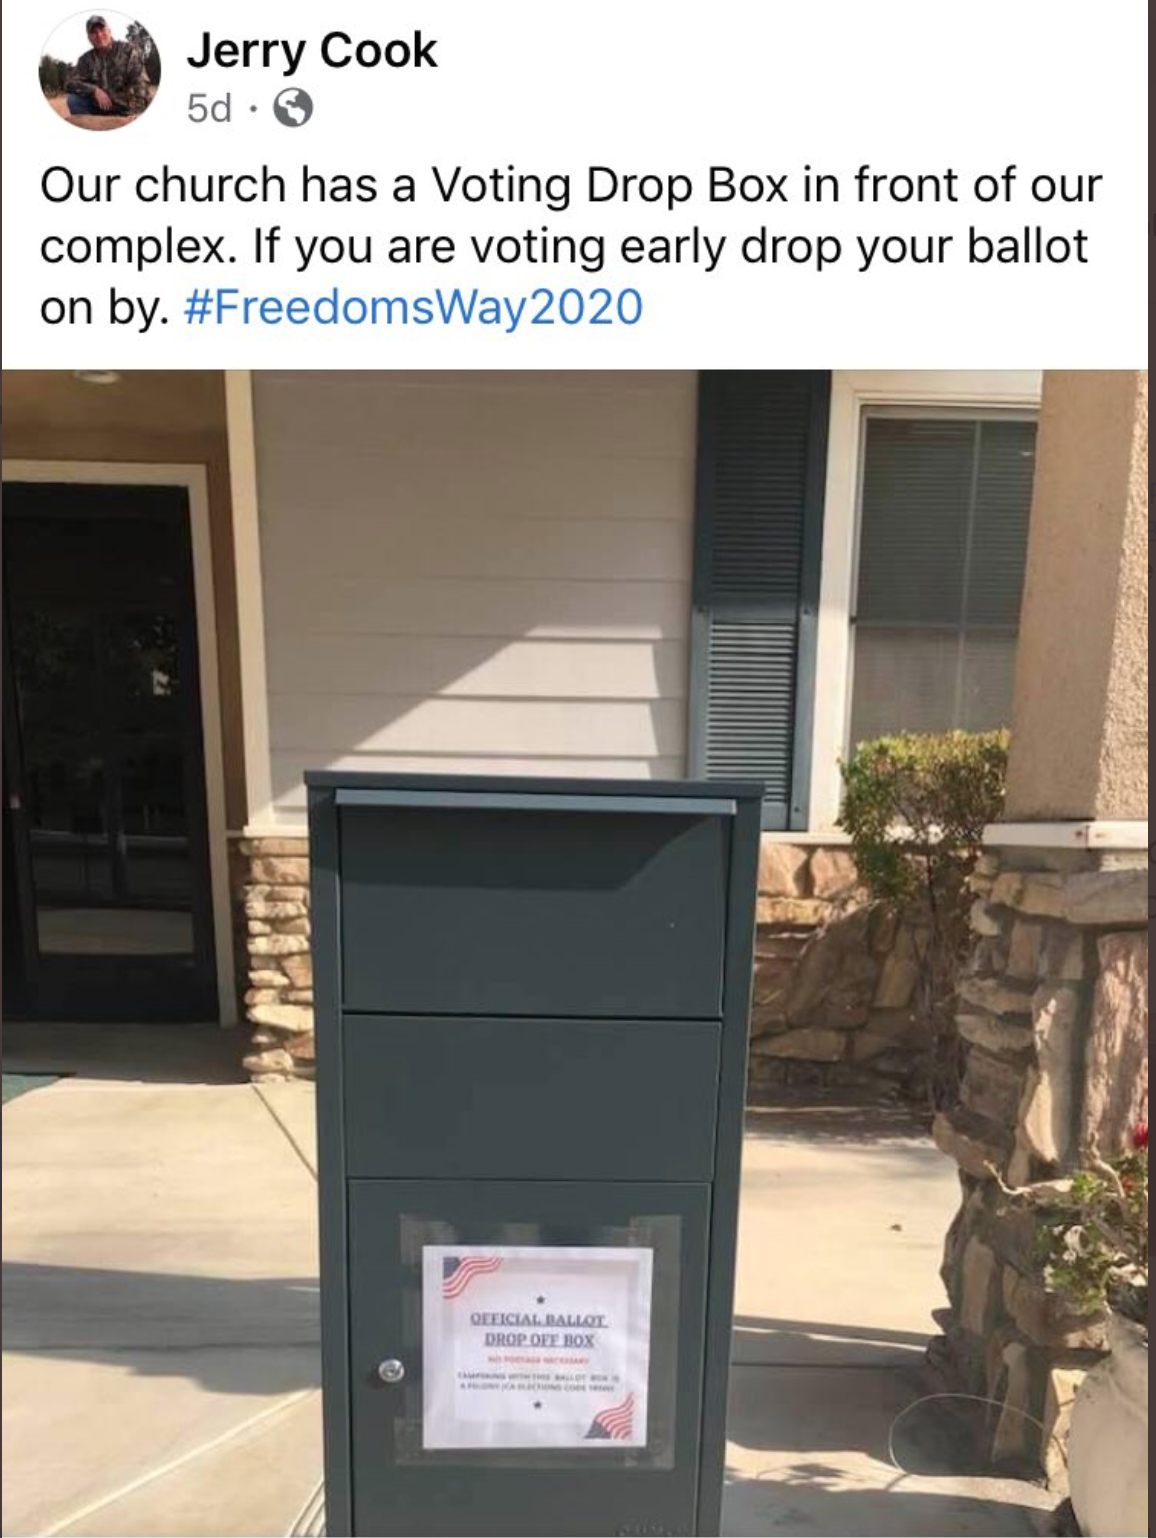 A fake ballot box outside the Freedom’s Way Baptist Church in Castaic, California in an image promoted on Facebook by Pastor Jerry Cook.